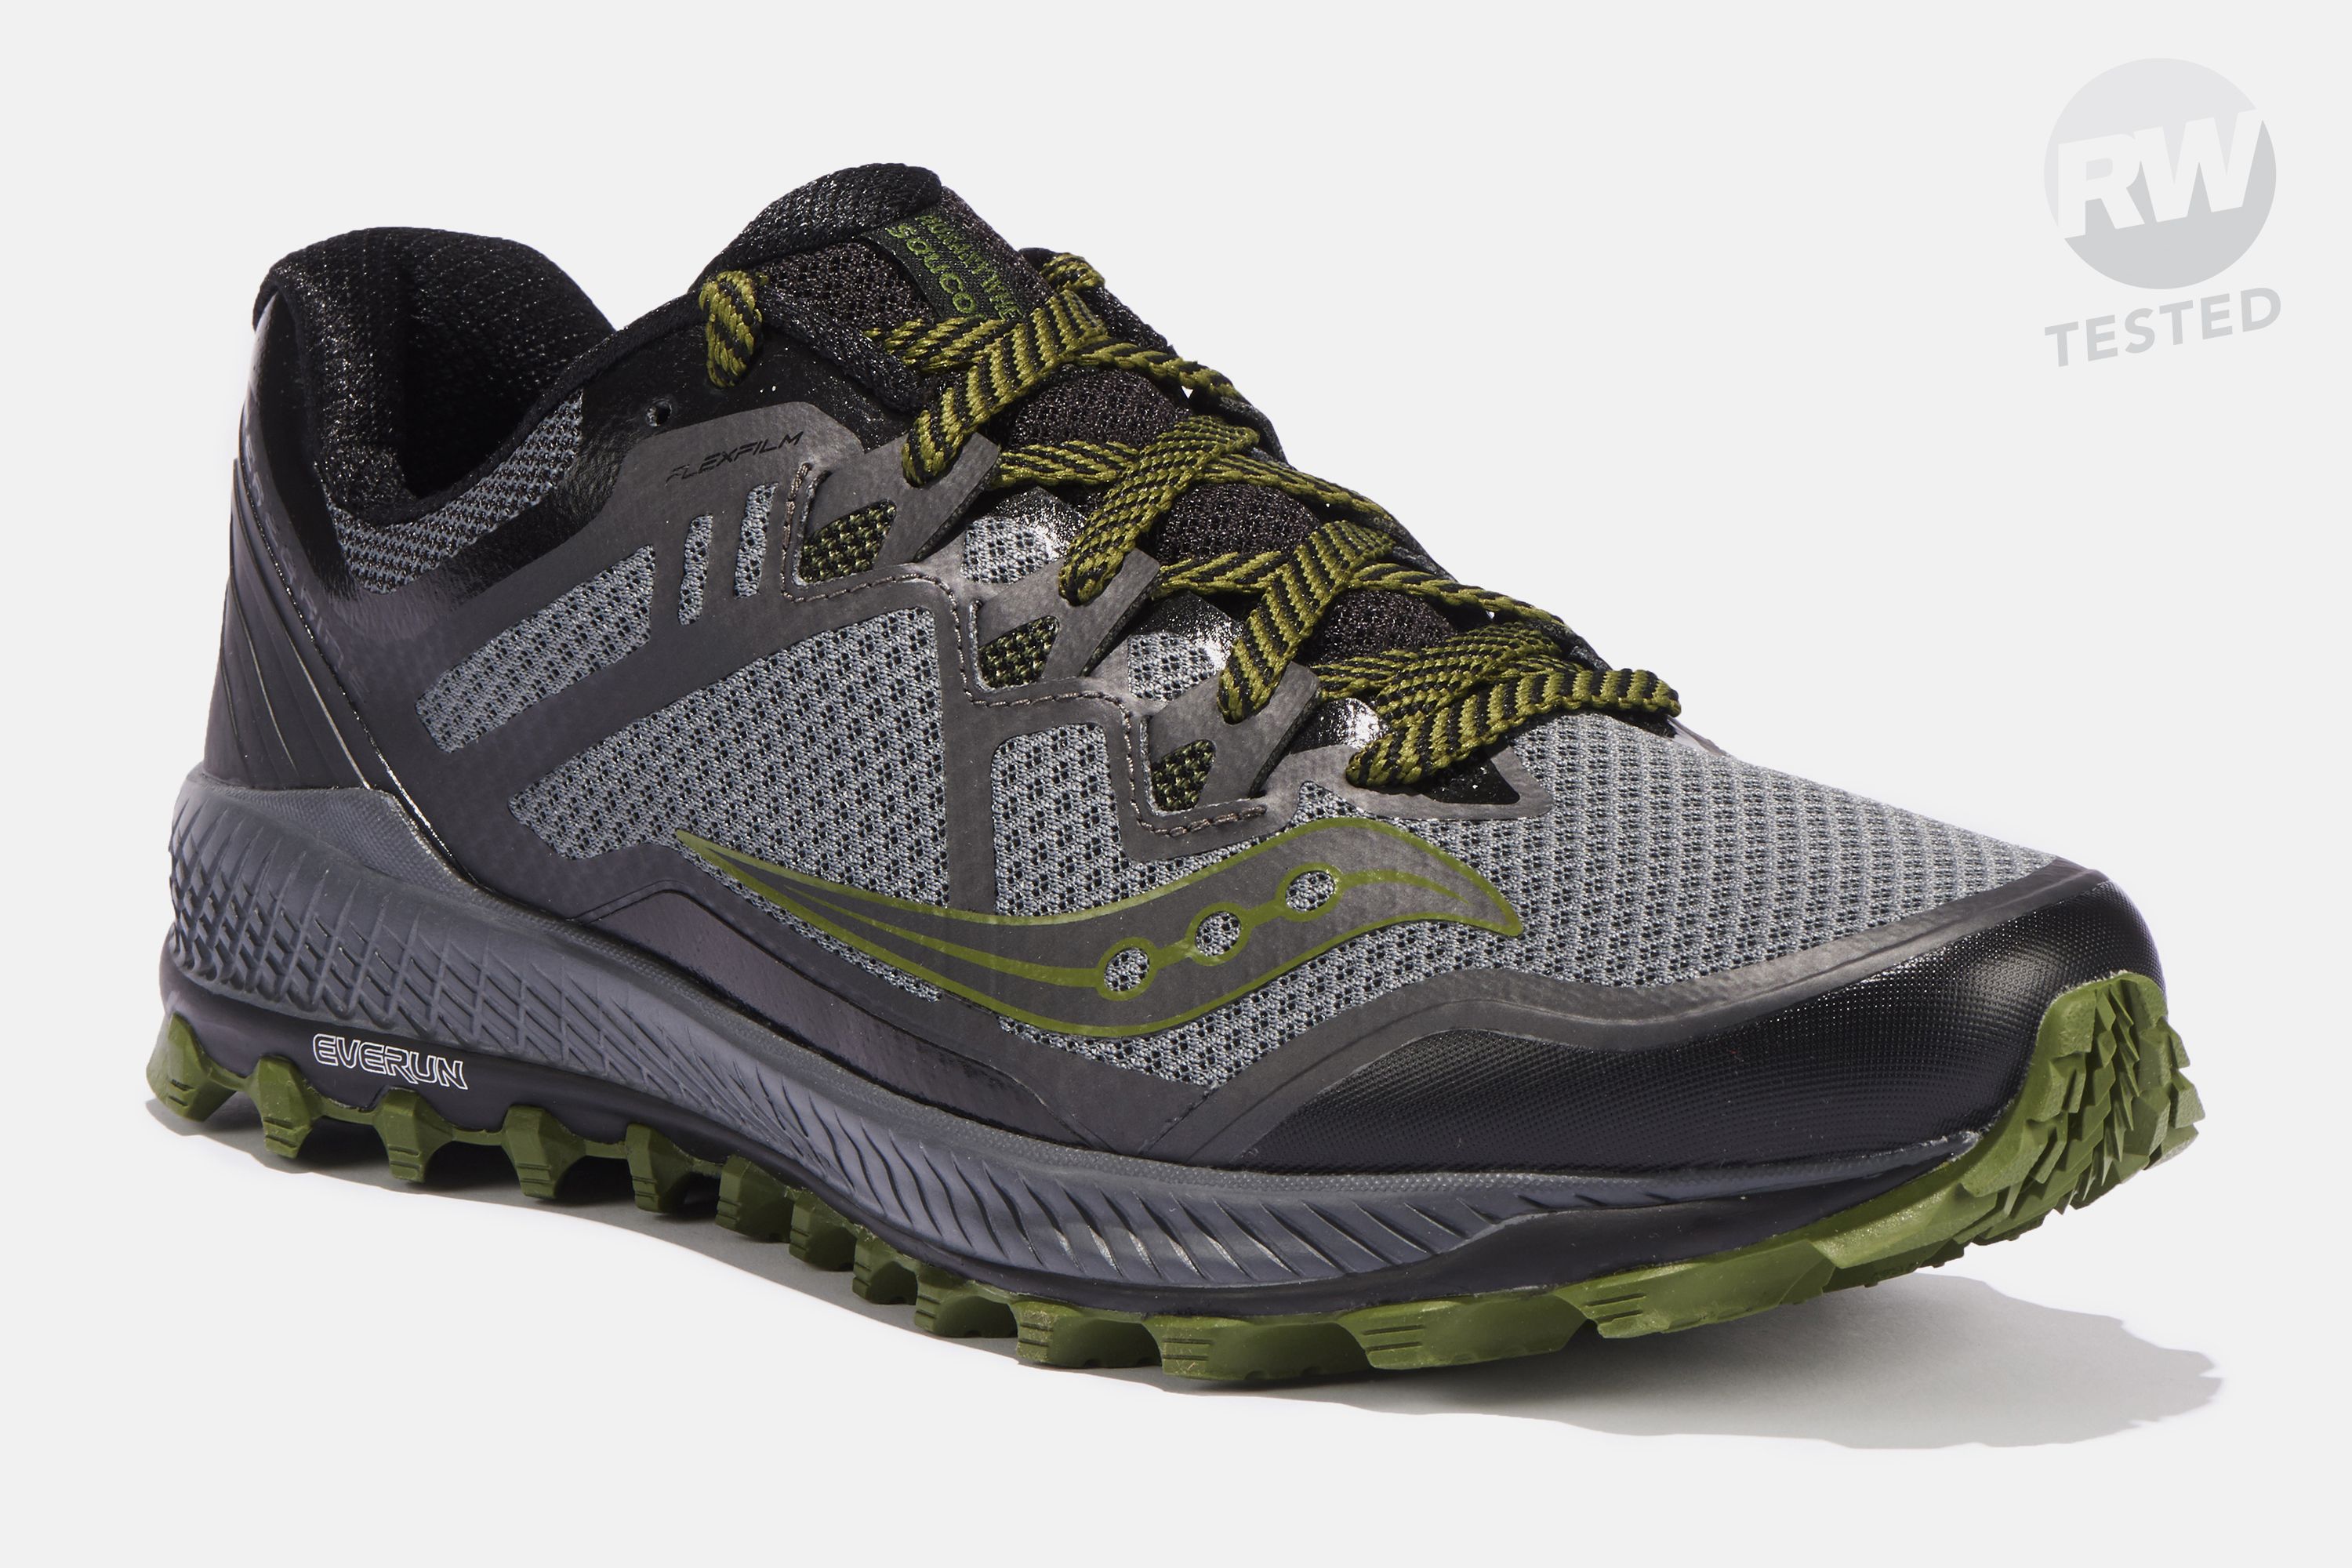 september Voorzien soep Saucony Peregrine 8 - A Trail Running Shoe for All Conditions